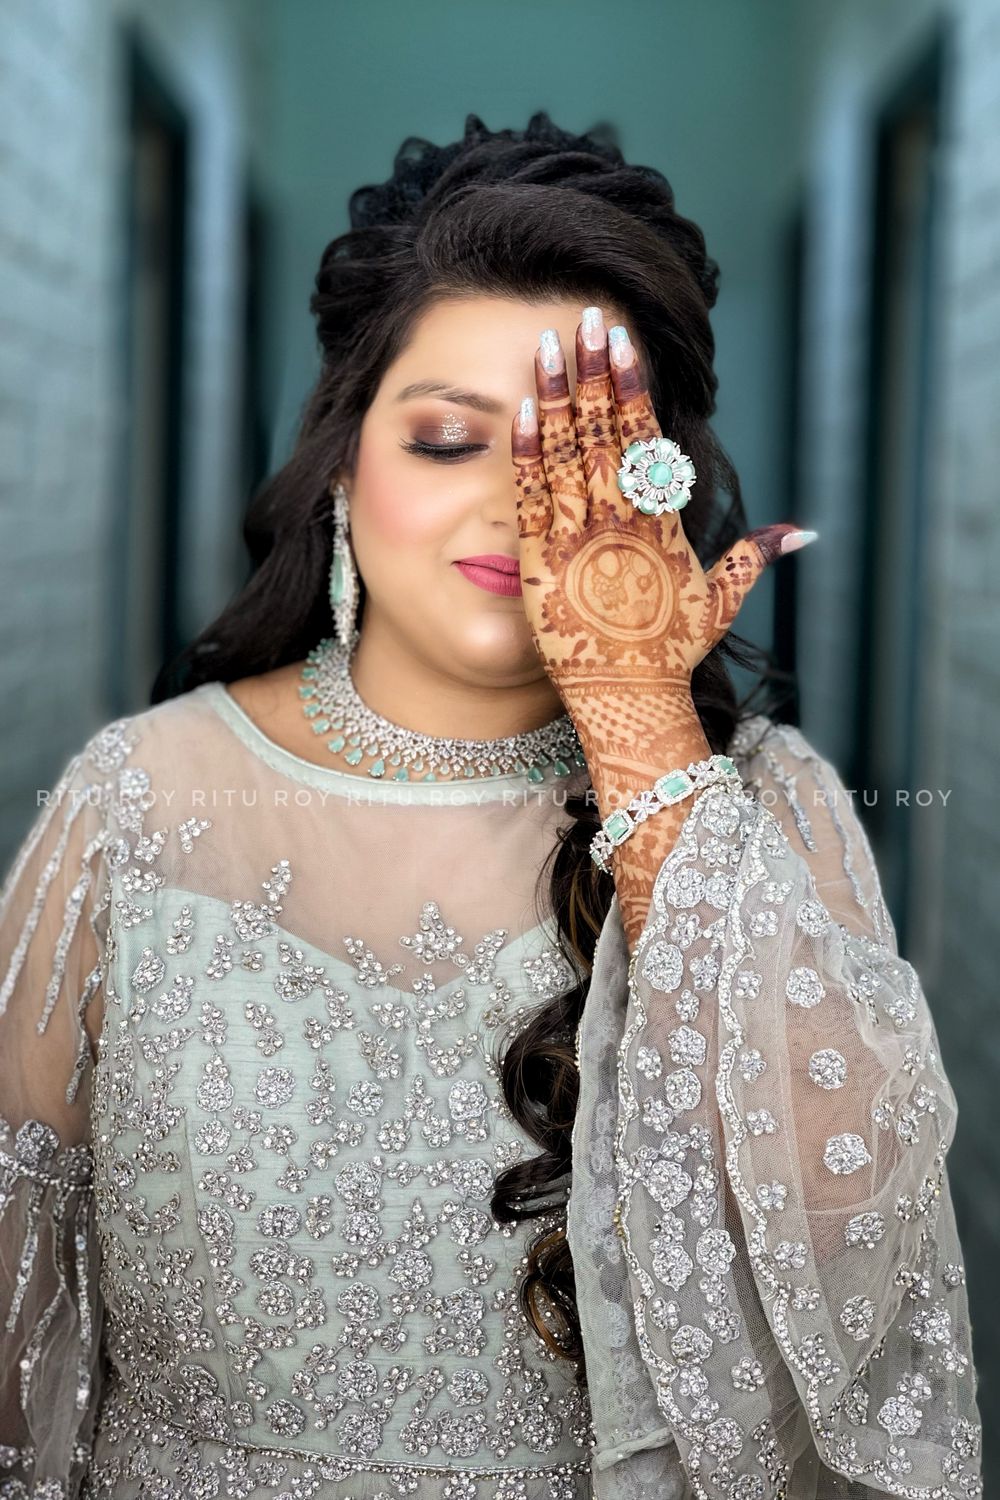 Photo From Engagement Makeup - By R.Three Salon